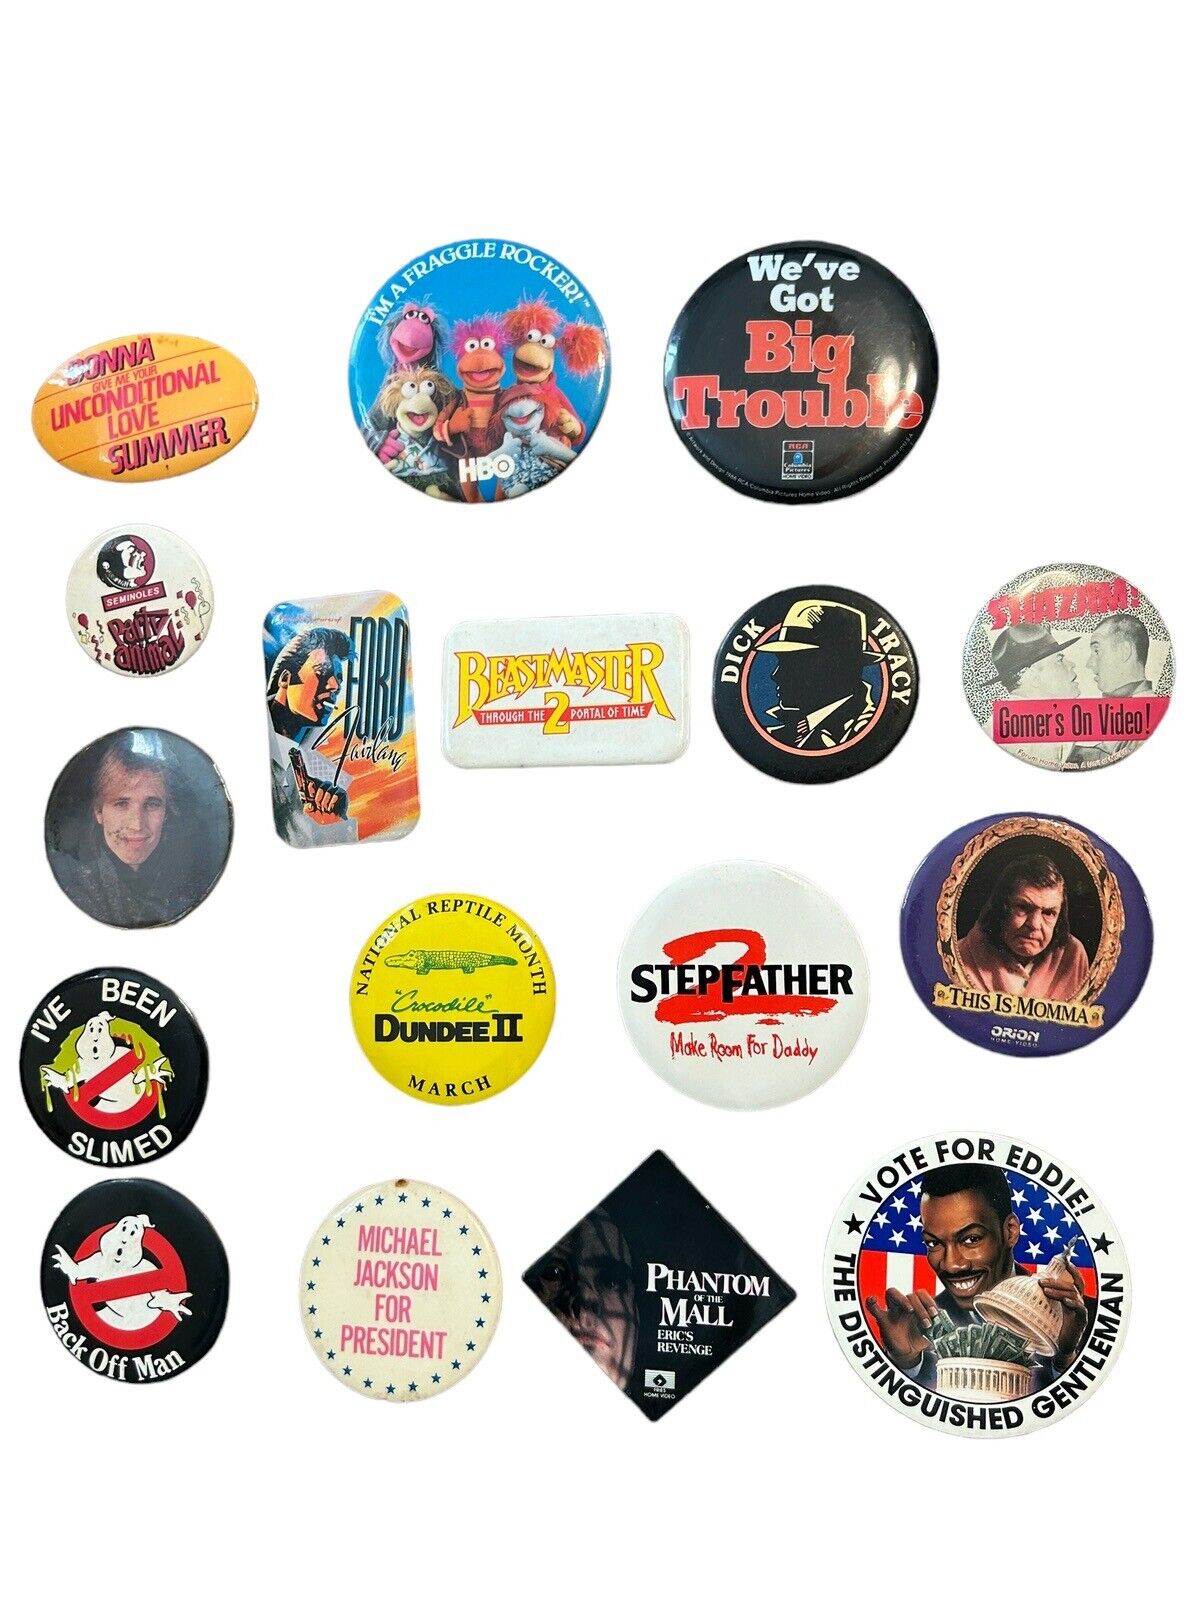 Lot 17 Vintage Button Pins Pinbacks Horror Ghostbusters Comedy Movies Music